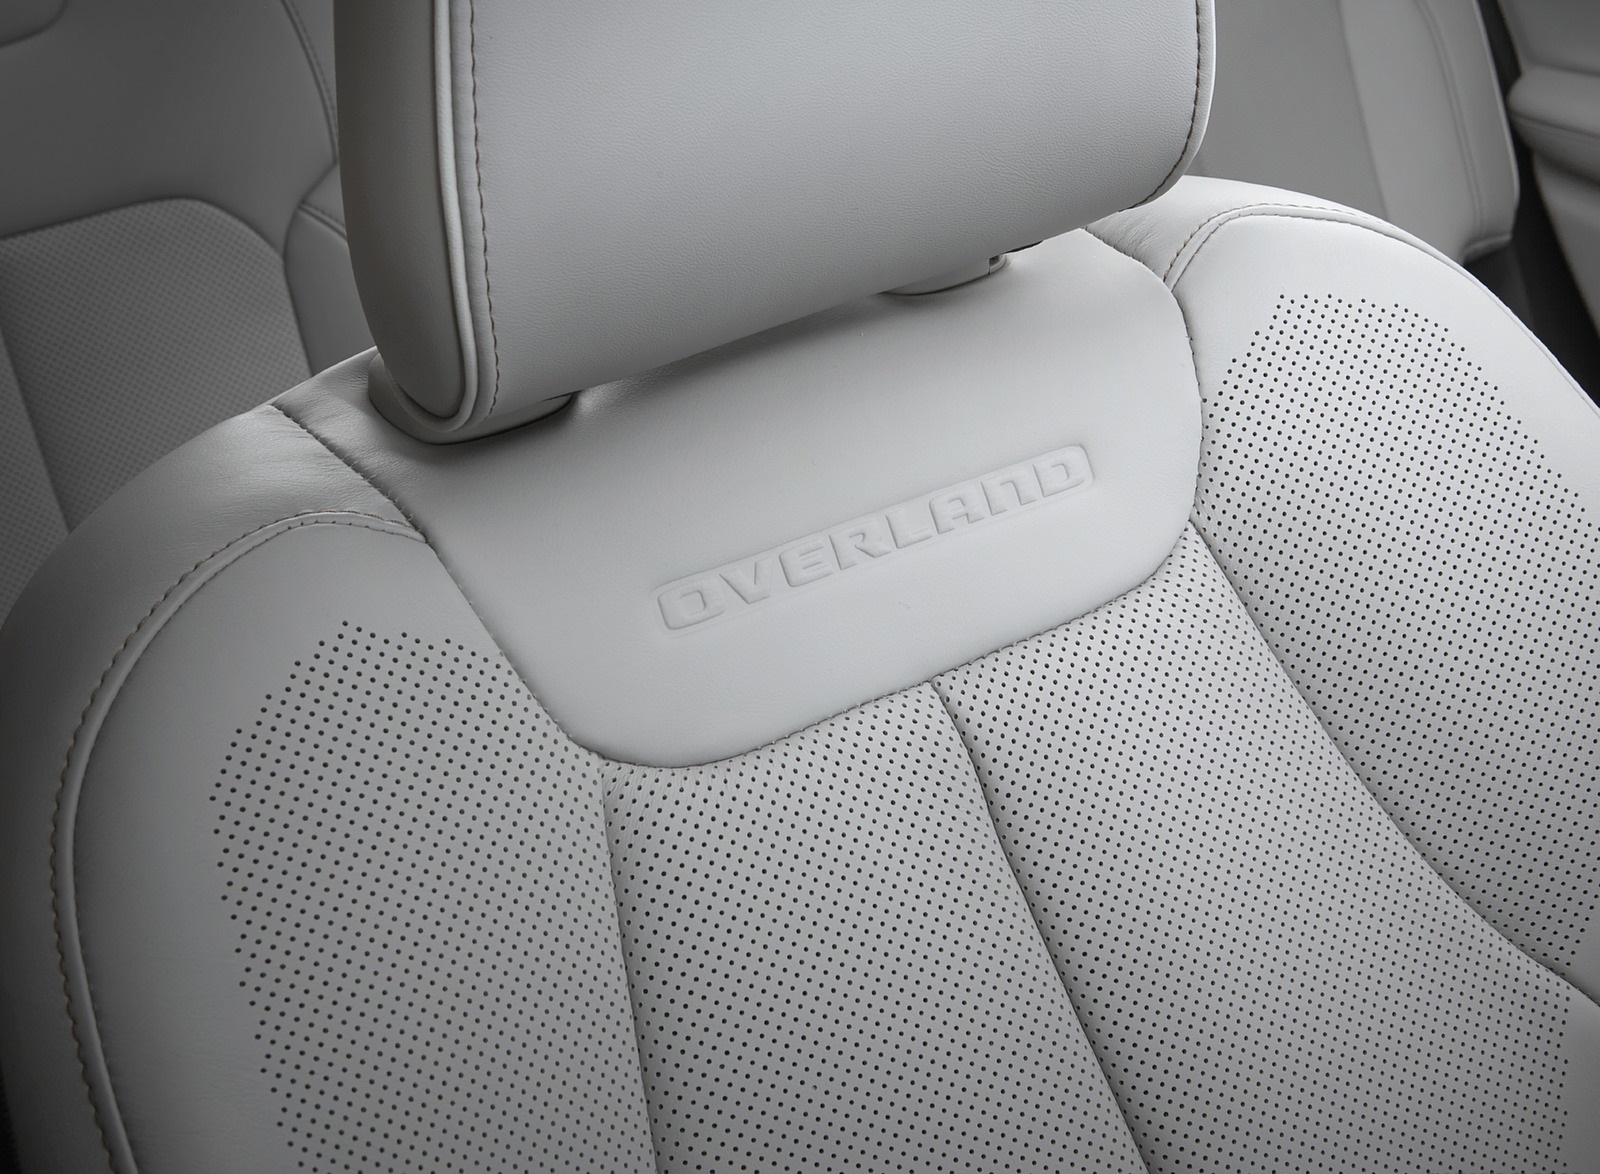 2021 Jeep Grand Cherokee L Overland Interior Seats Wallpapers #45 of 51